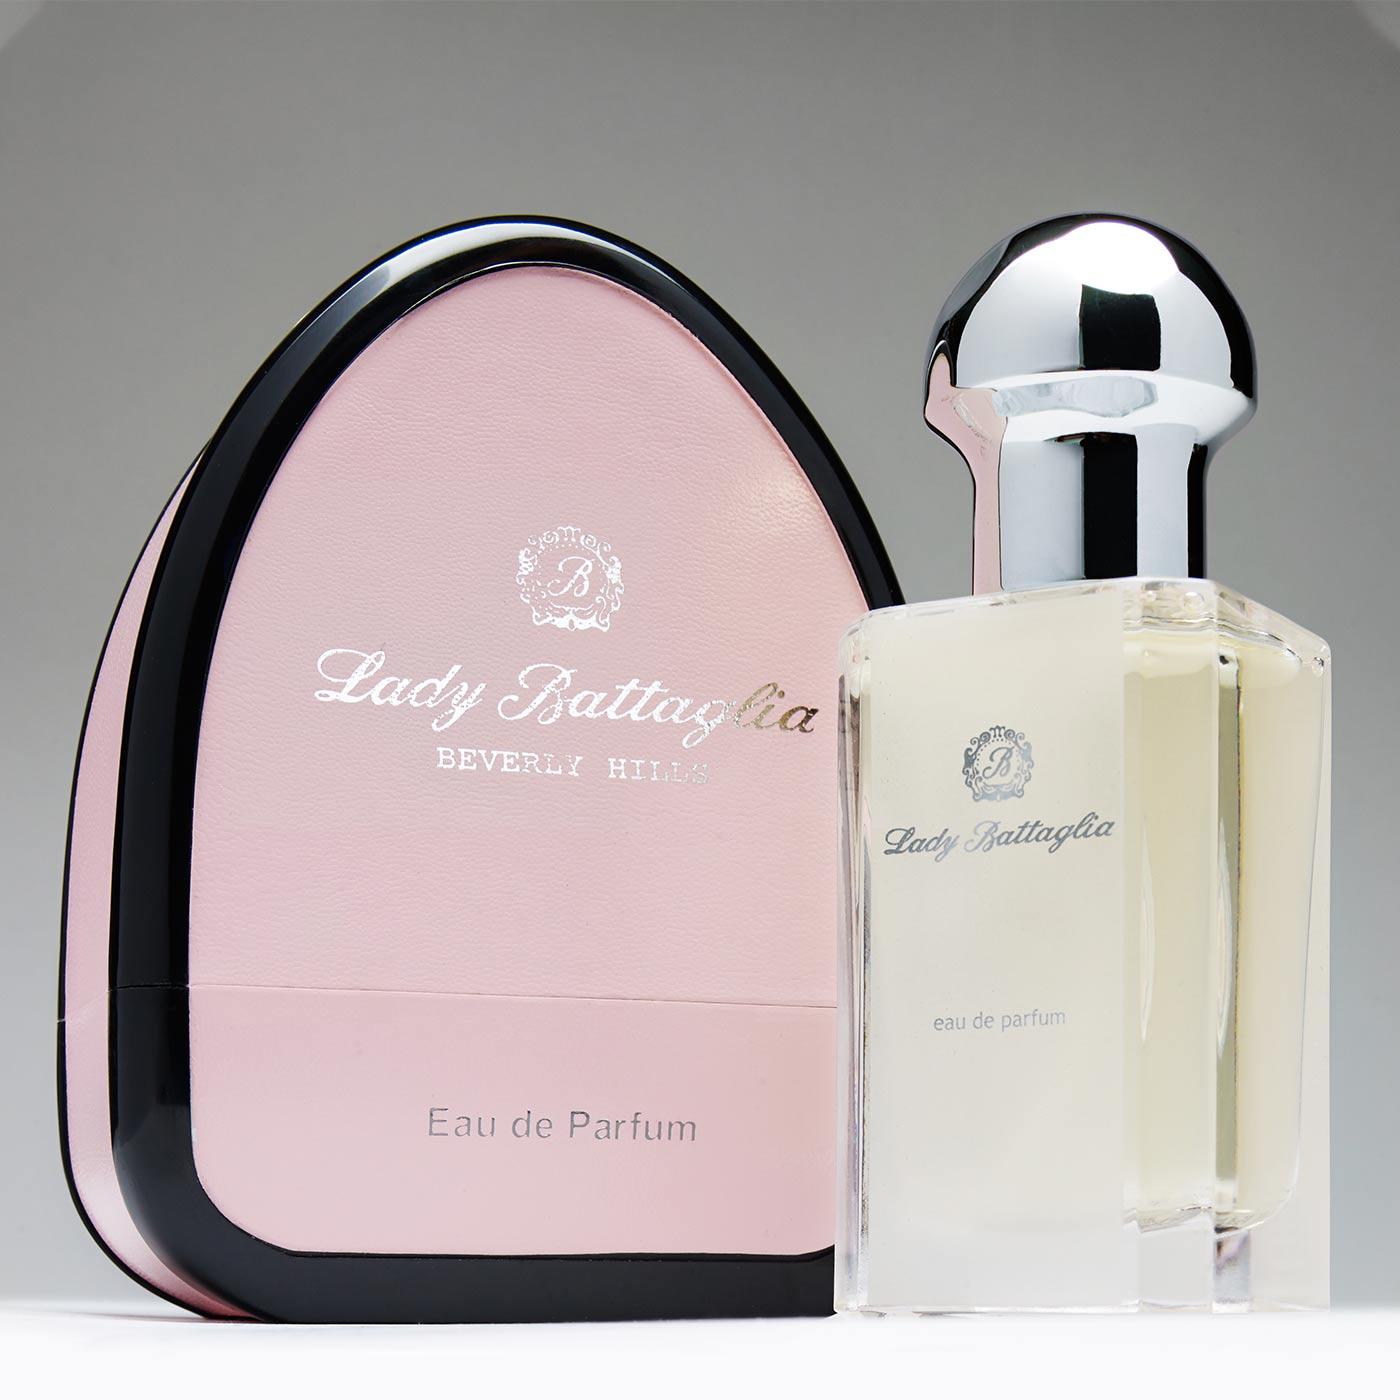 Lady Battaglia is a delicate and powdery perfume for women who are attracted to soft, elegant, and graceful scents.